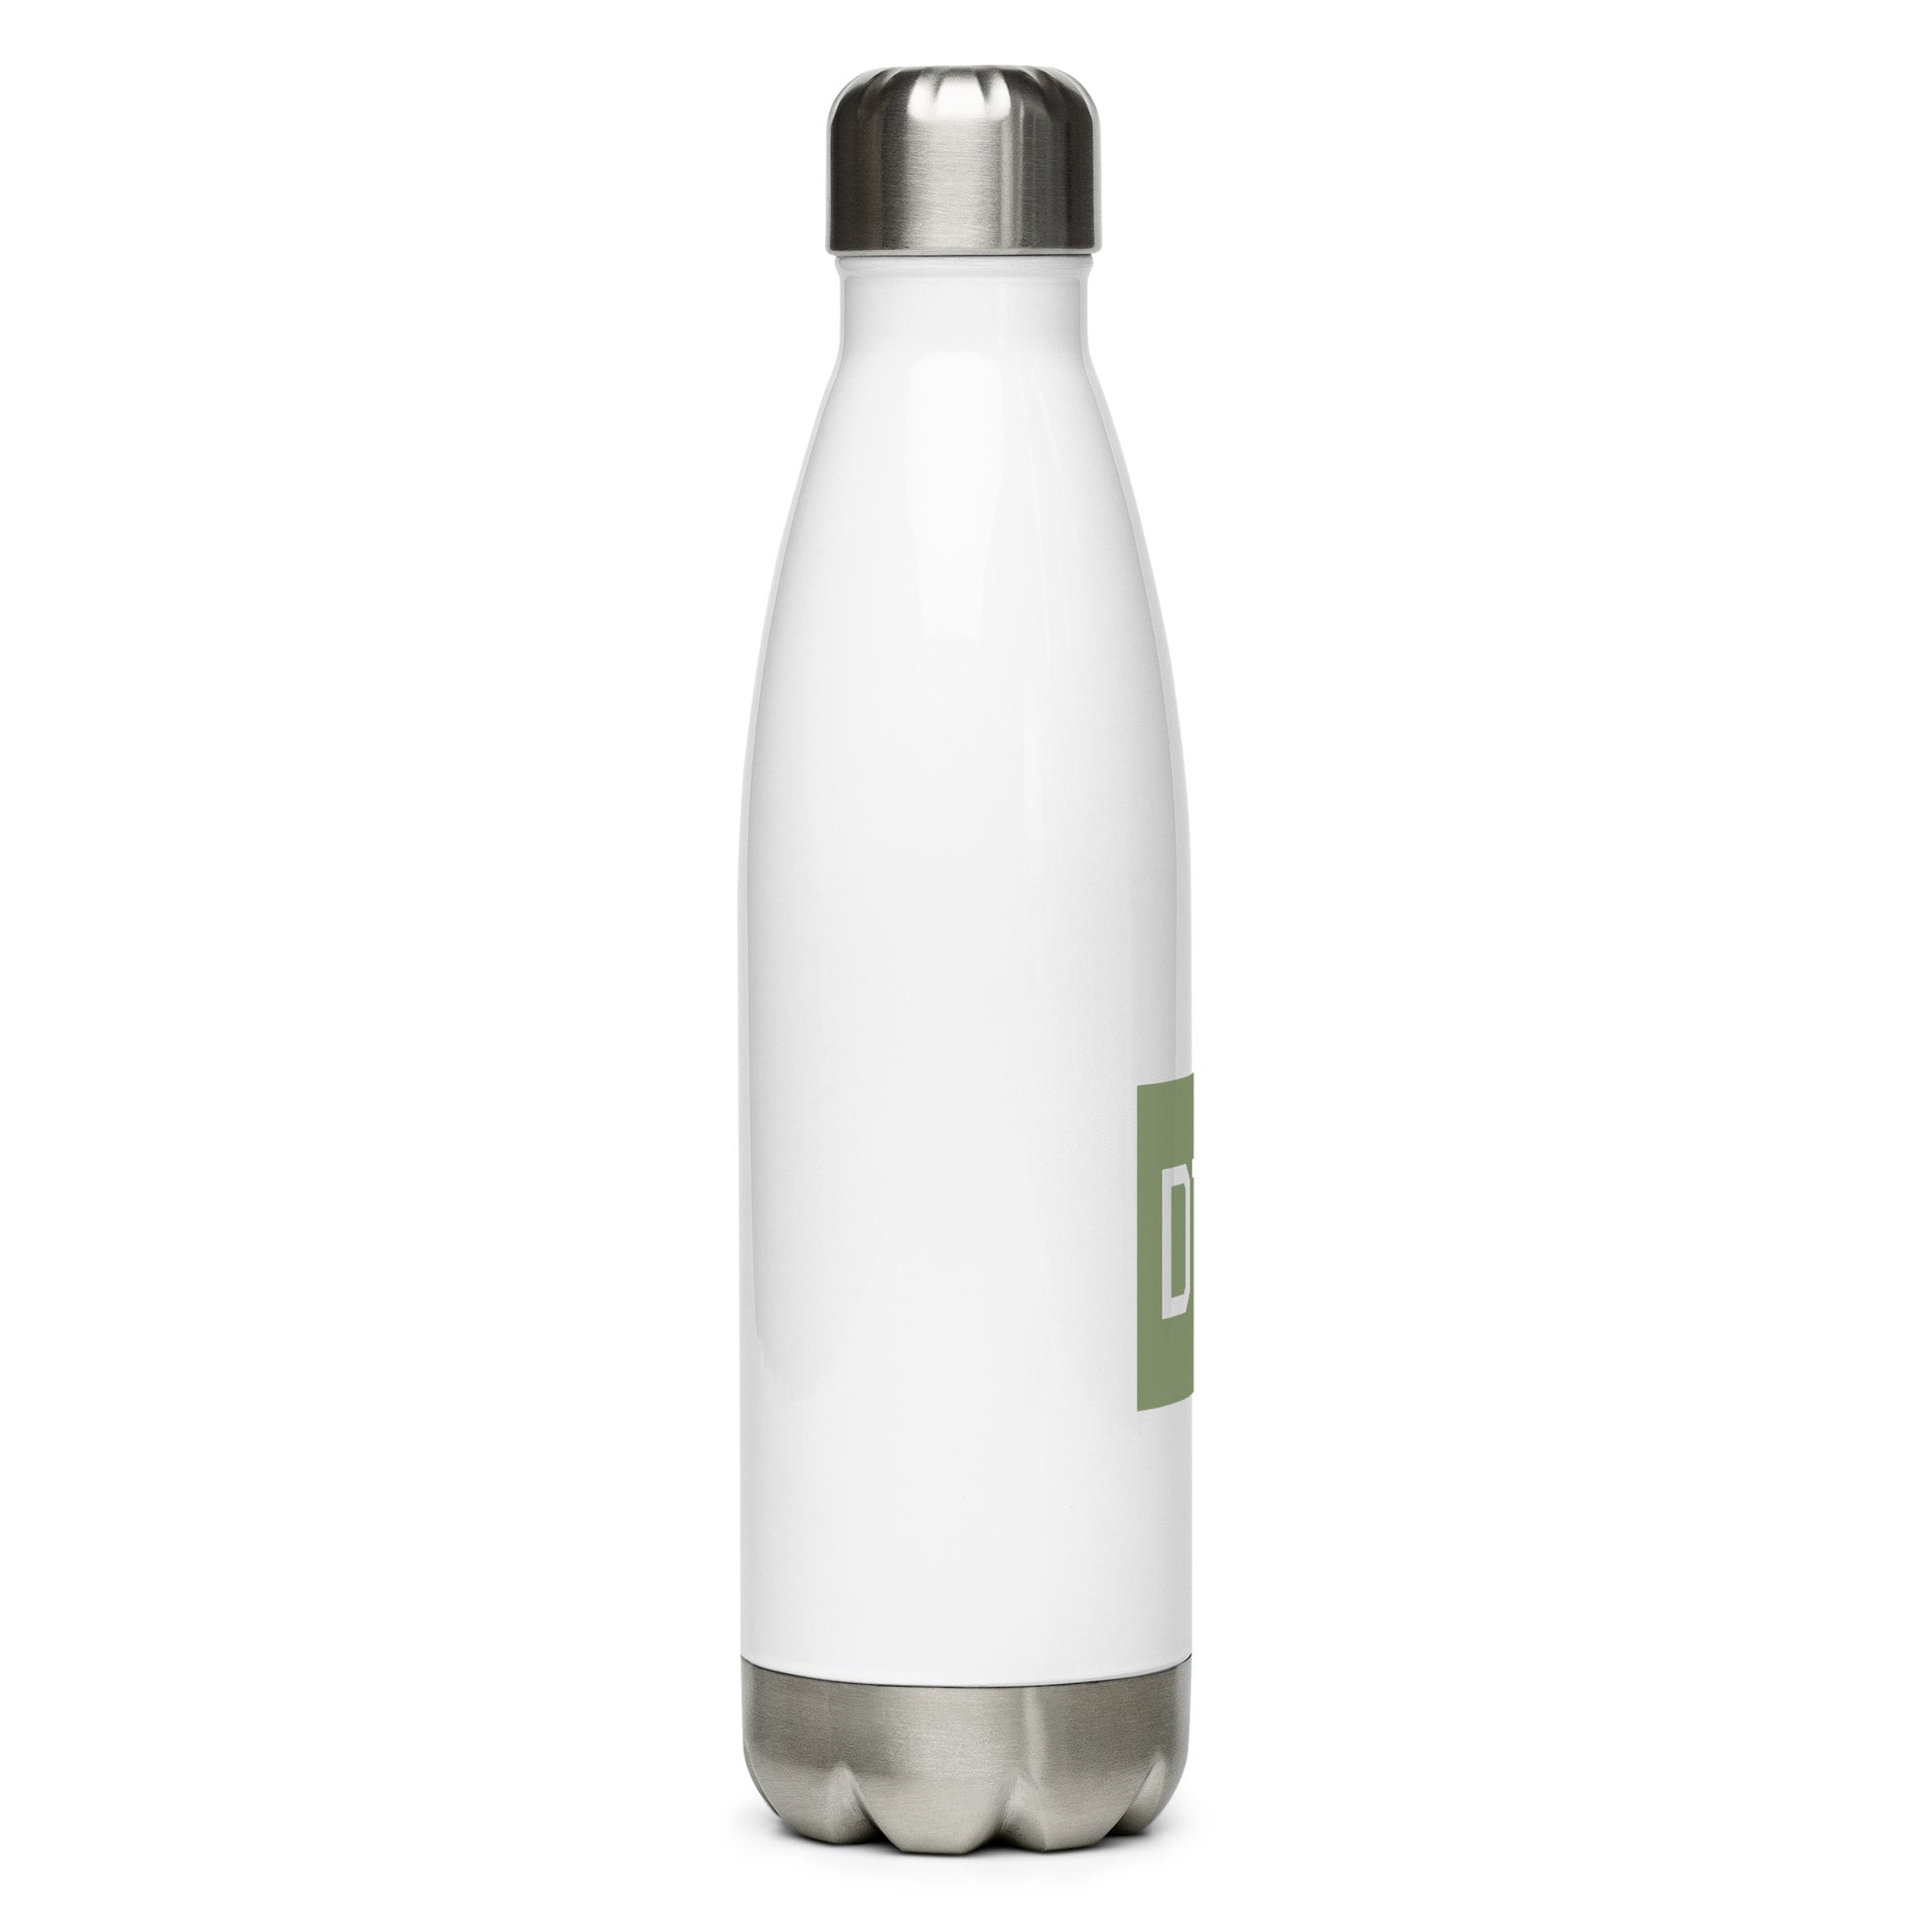 Aviation Gift Water Bottle - Camo Green • DTW Detroit • YHM Designs - Image 07